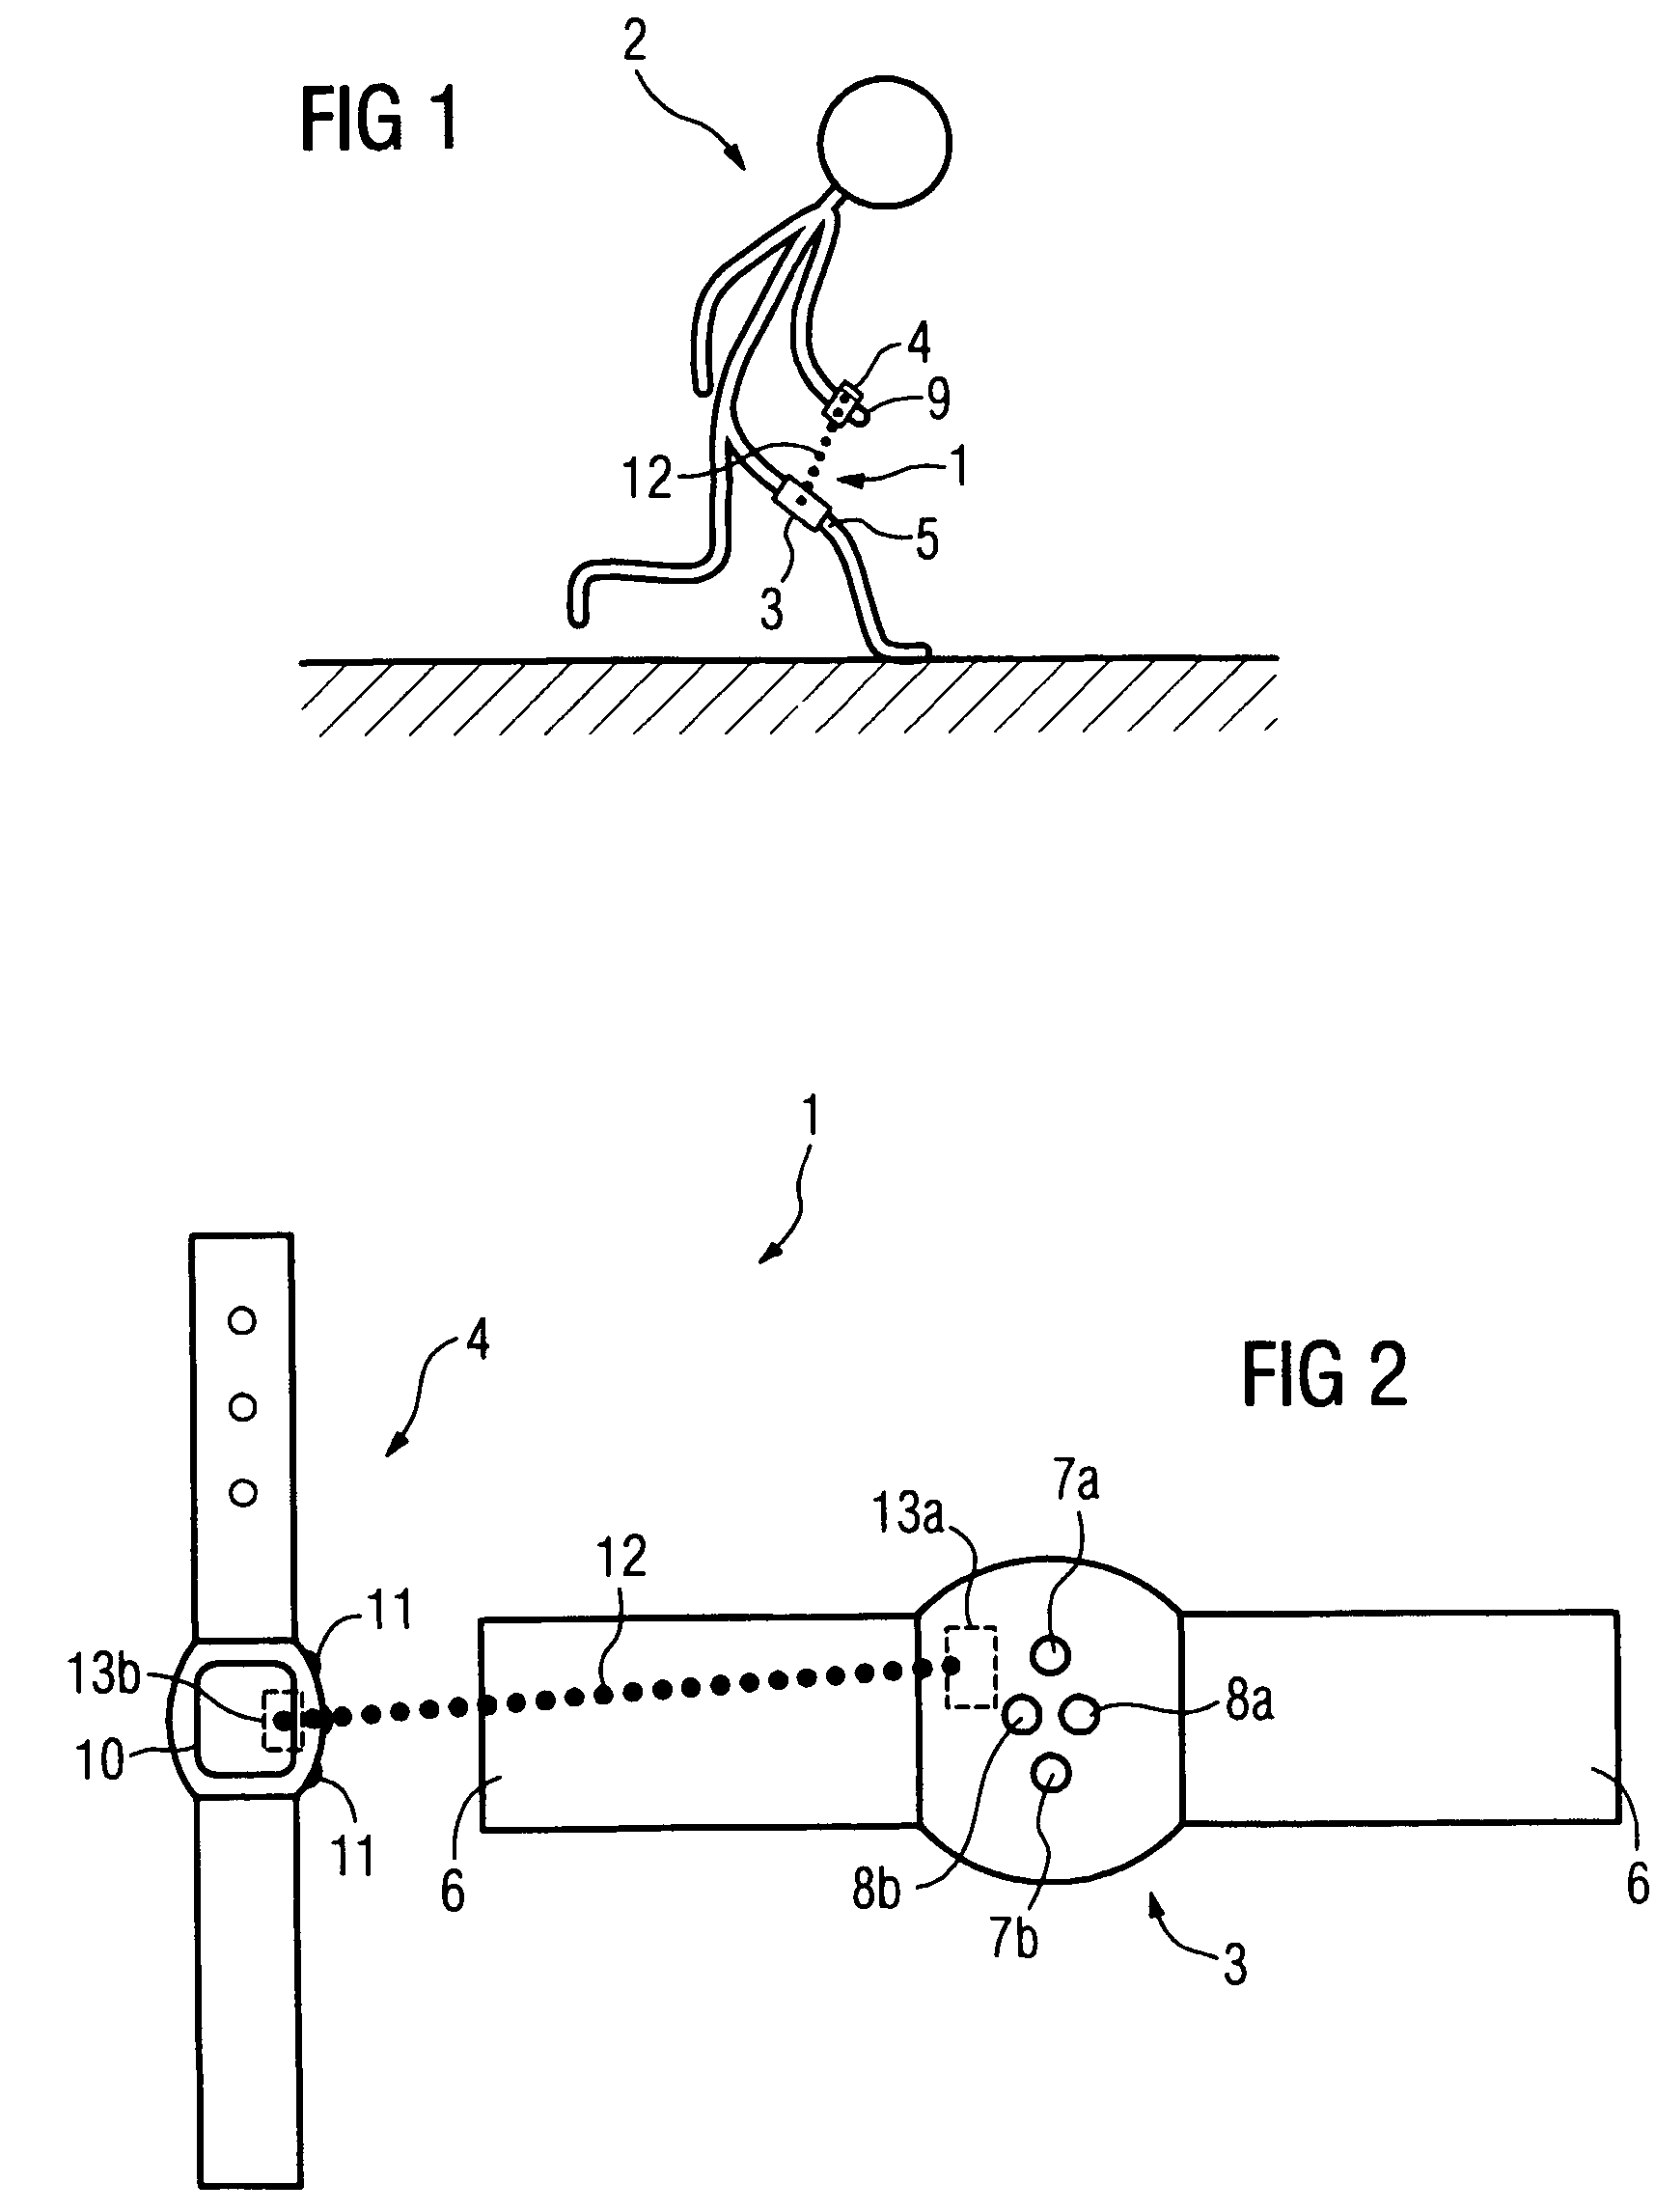 Method and apparatus for training adjustment in sports, in particular in running sports